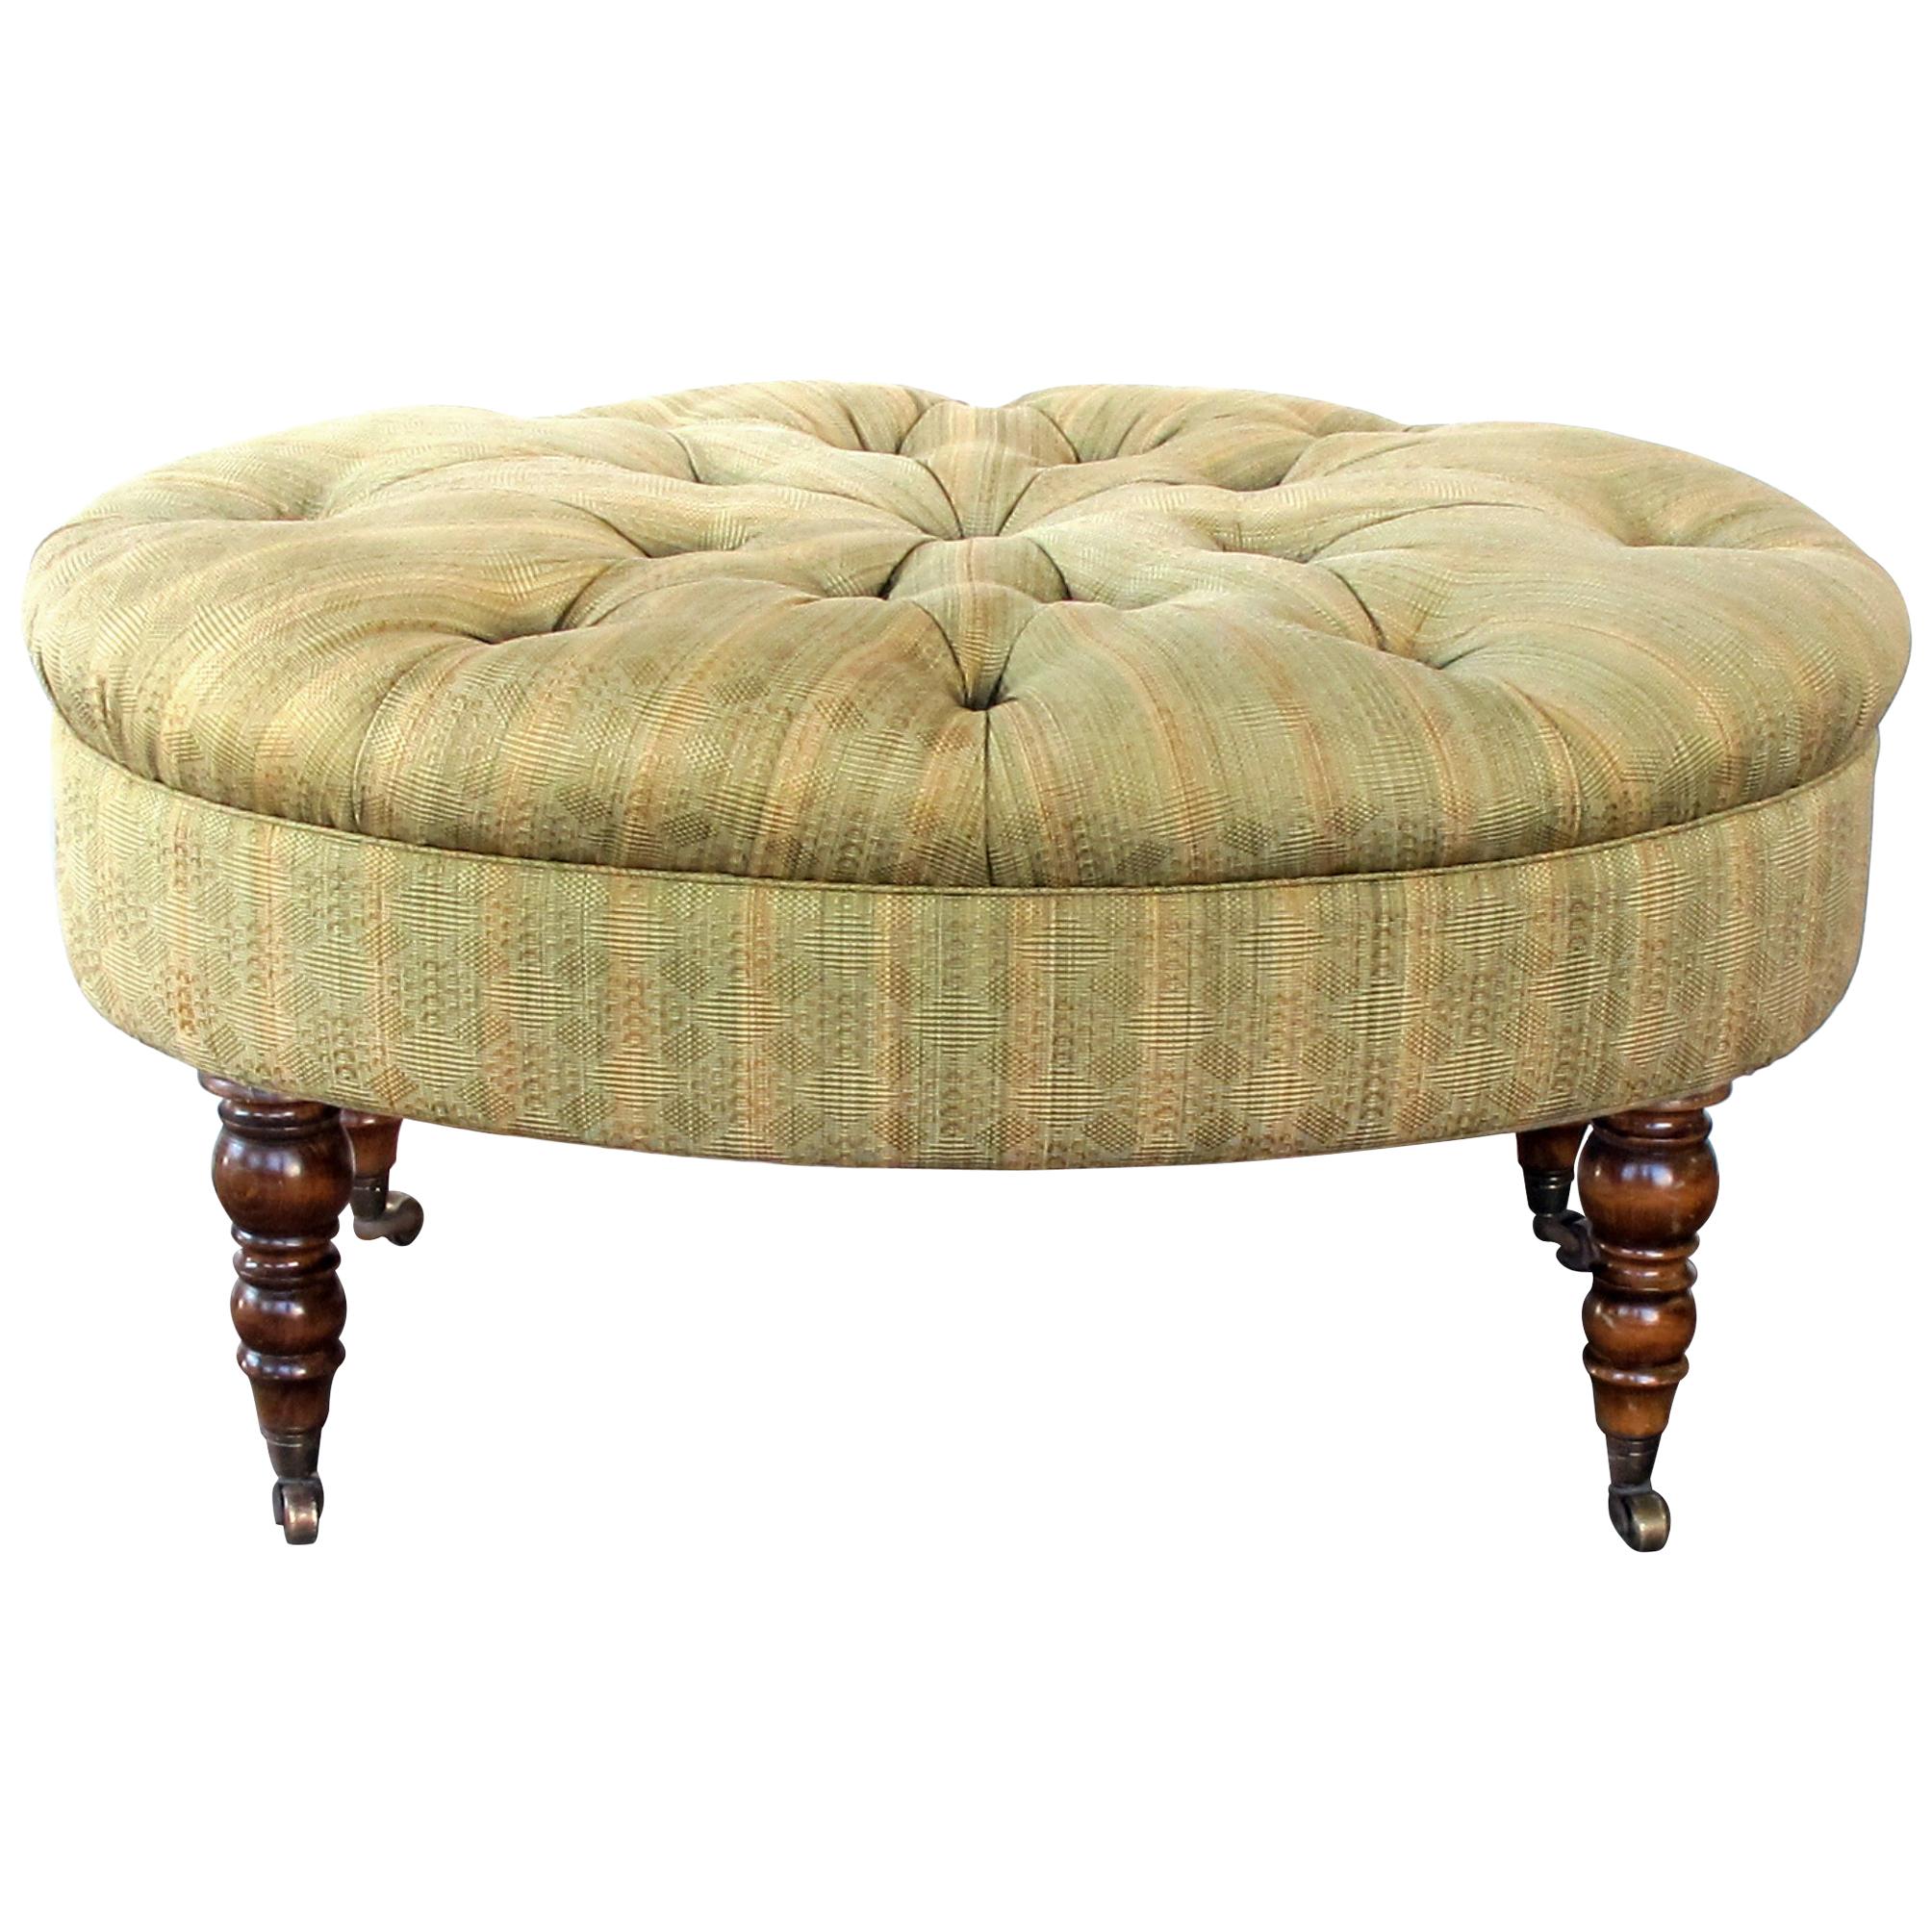 Handsome English Late 19th Century Oval Ottoman/Stool with Turned Legs & Casters For Sale